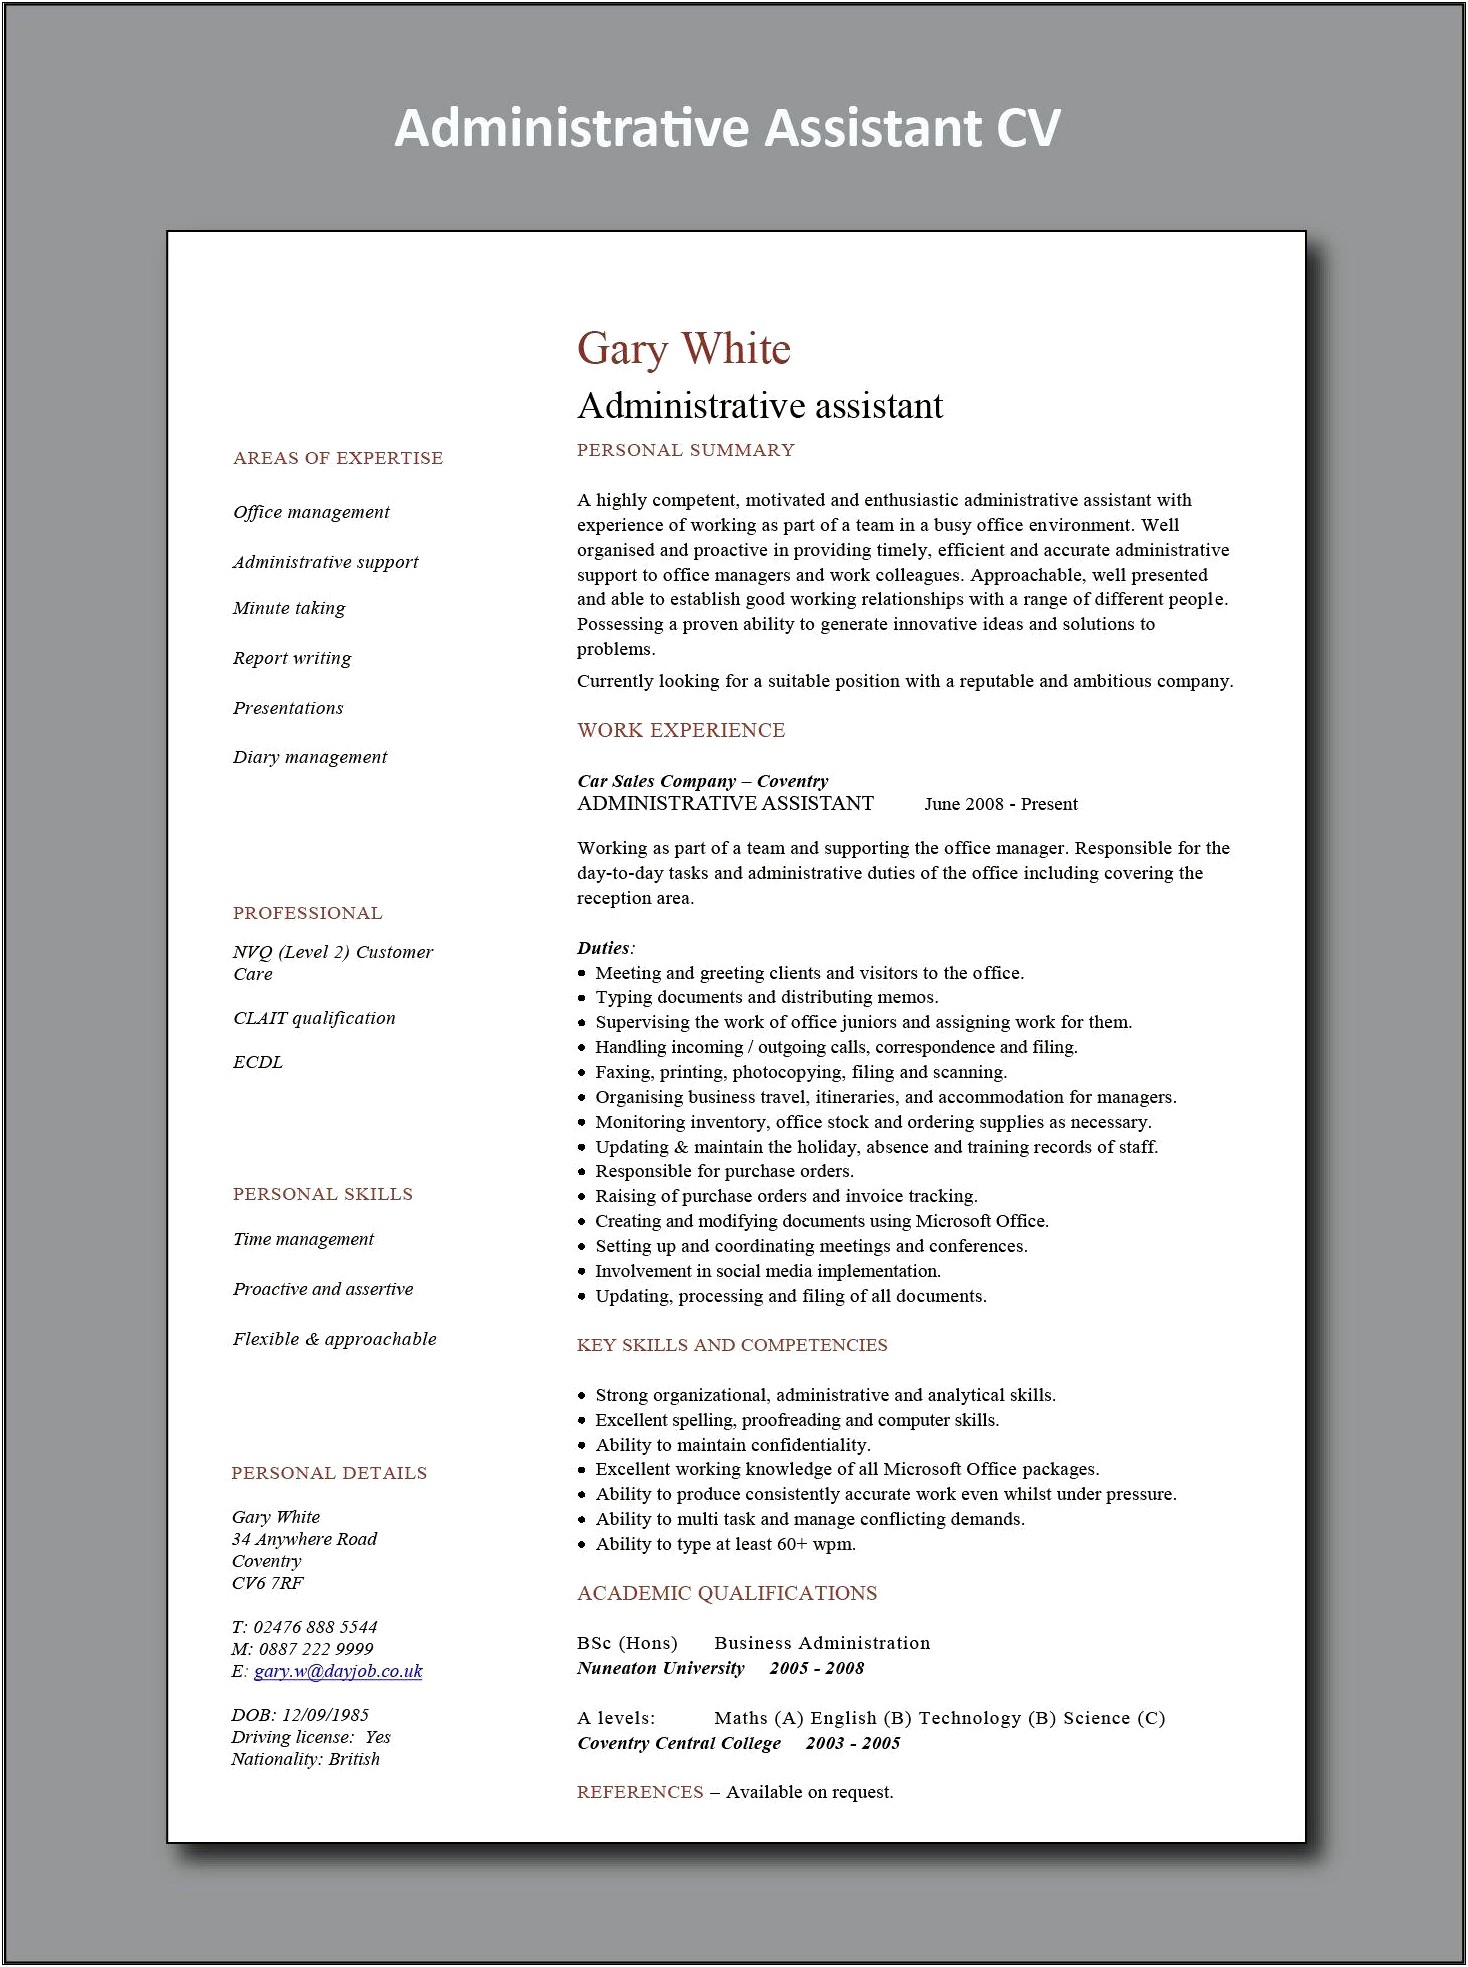 Resume Skills Examples Of Auto Desk Manager